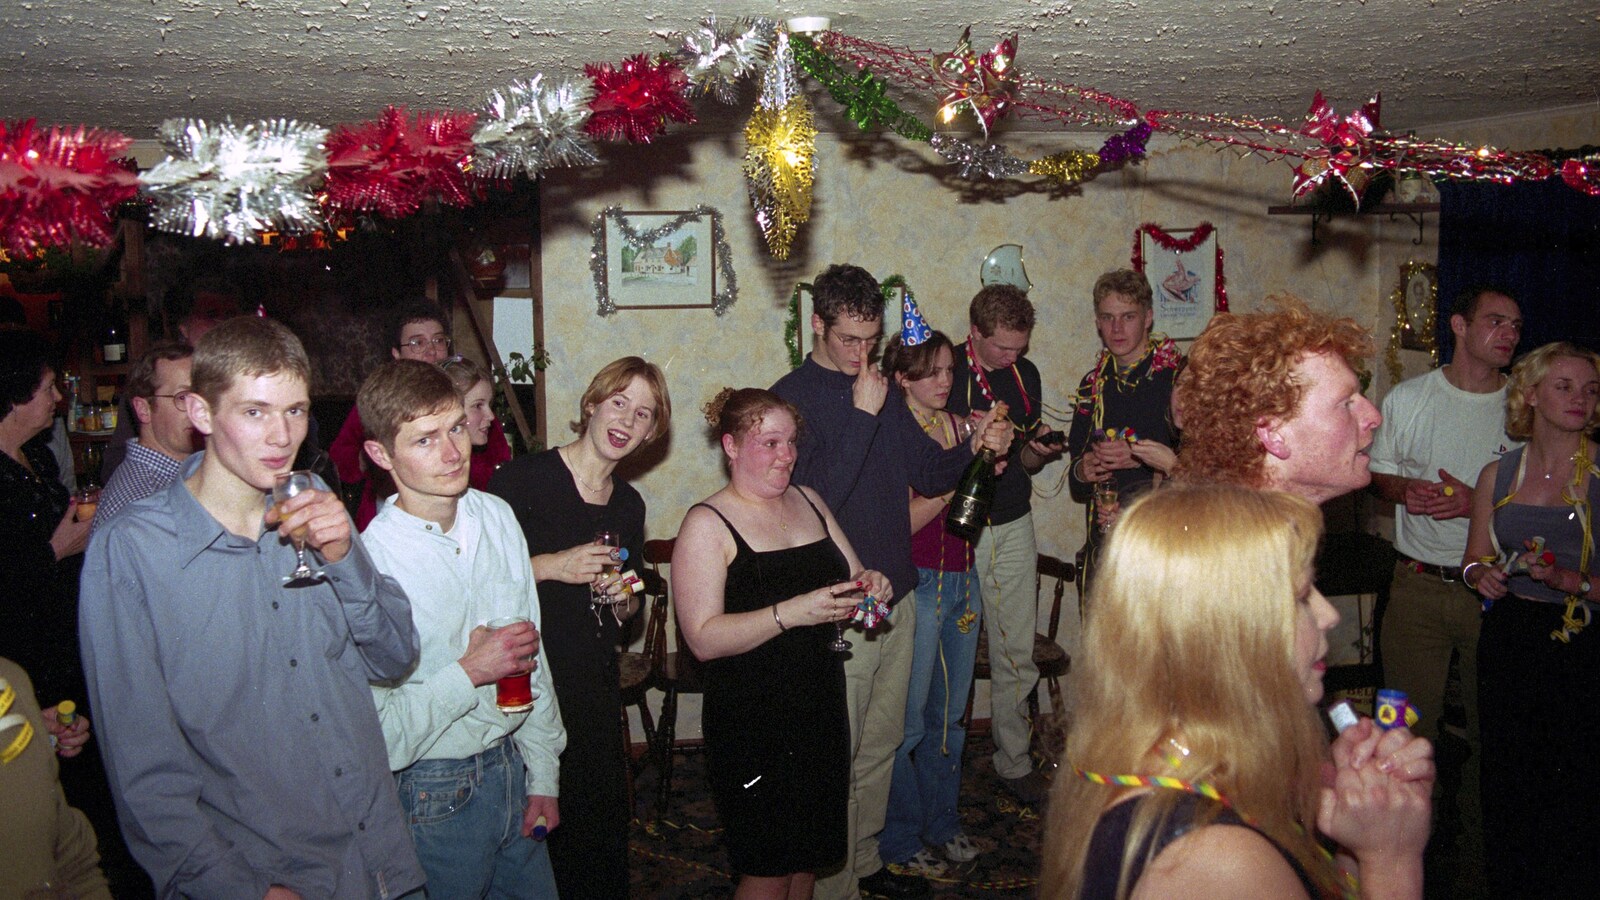 The Boy Phil and Ninja M from New Year's Eve at The Swan Inn, Brome, Suffolk - 31st December 1999